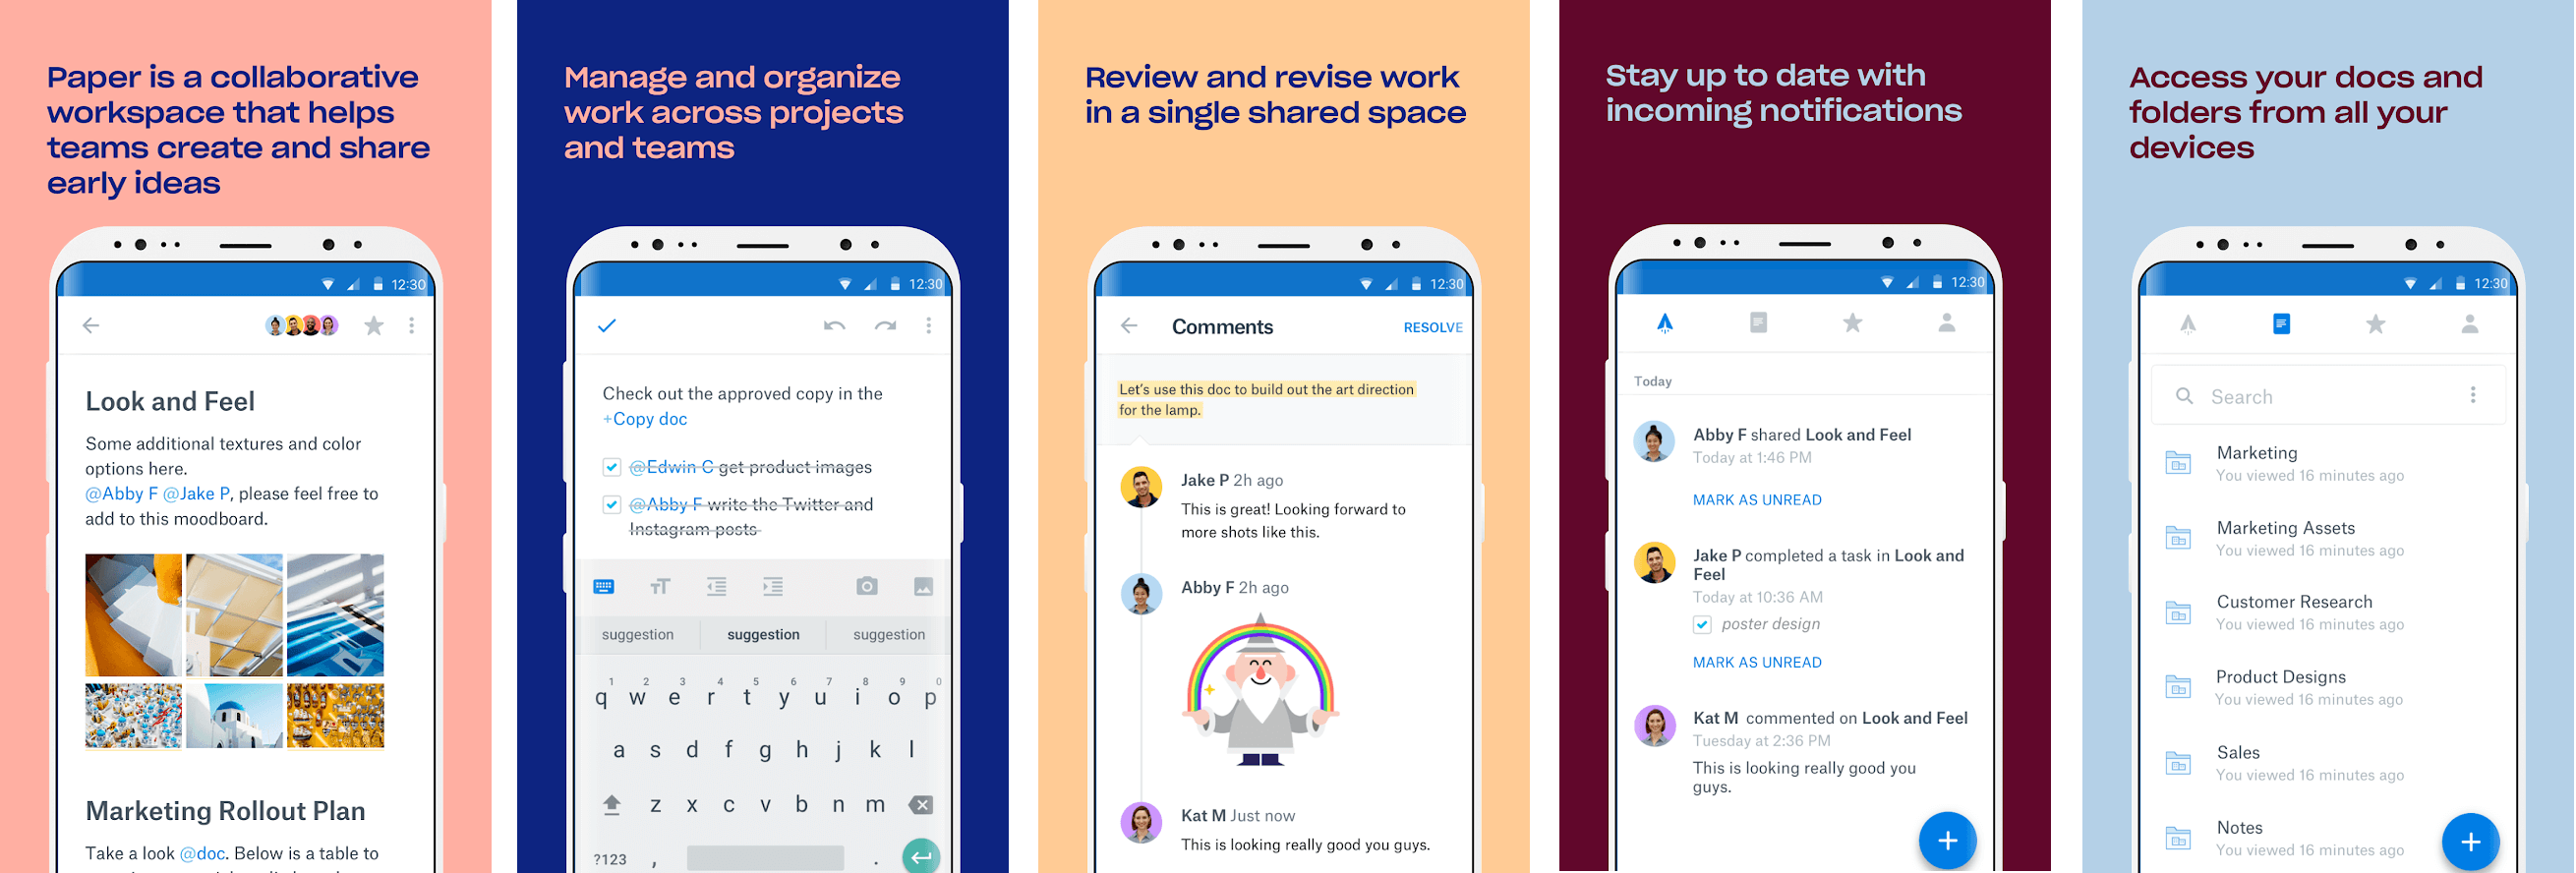 Dropbox Paper app for Android